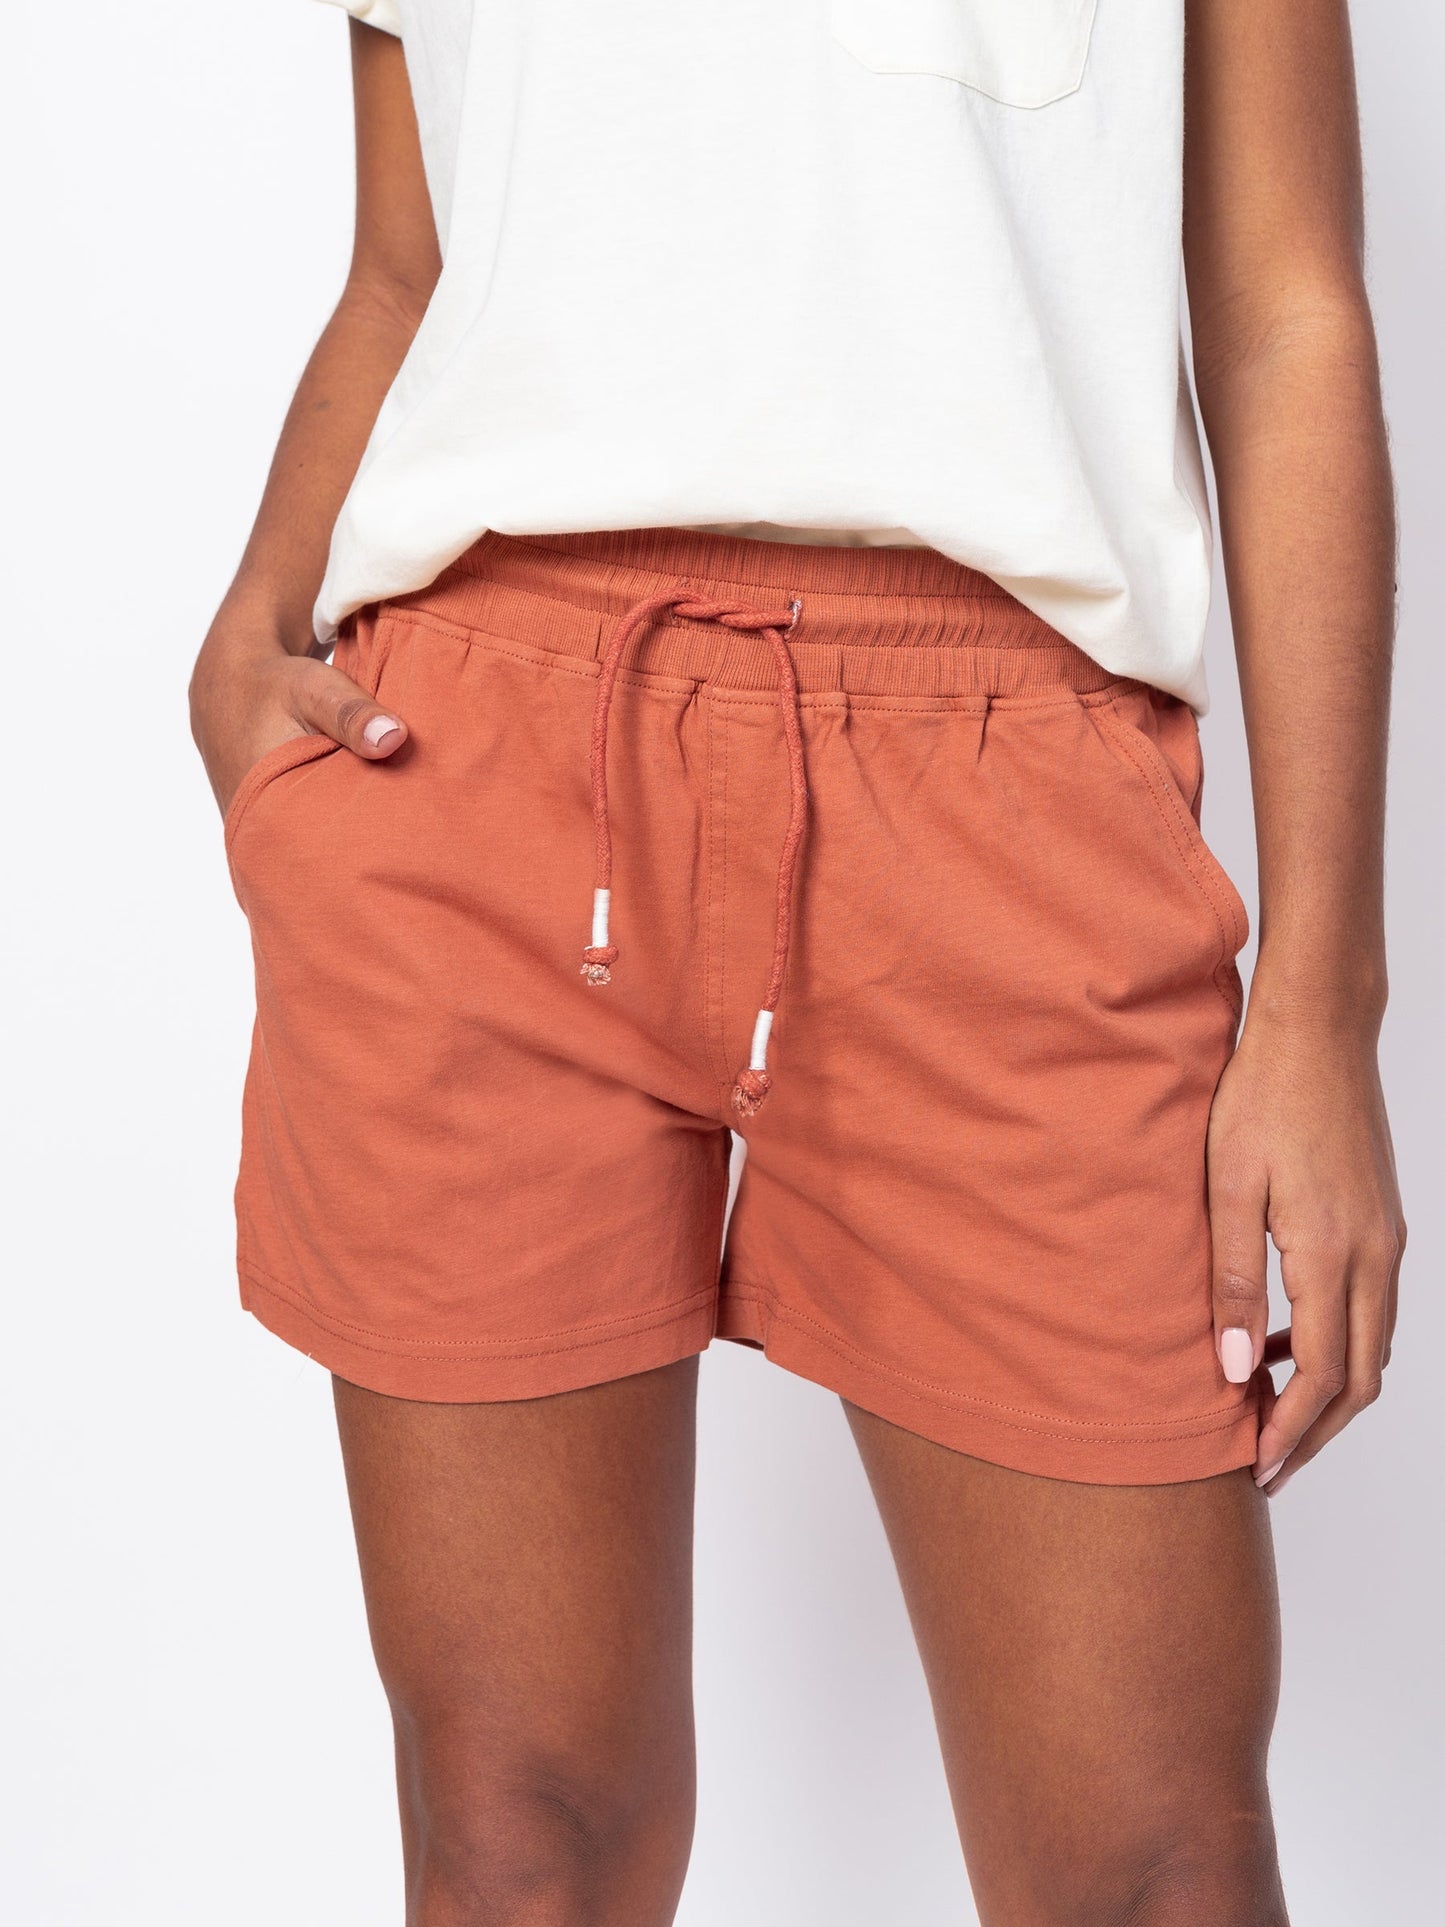 Spice Shorts by Happy Earth